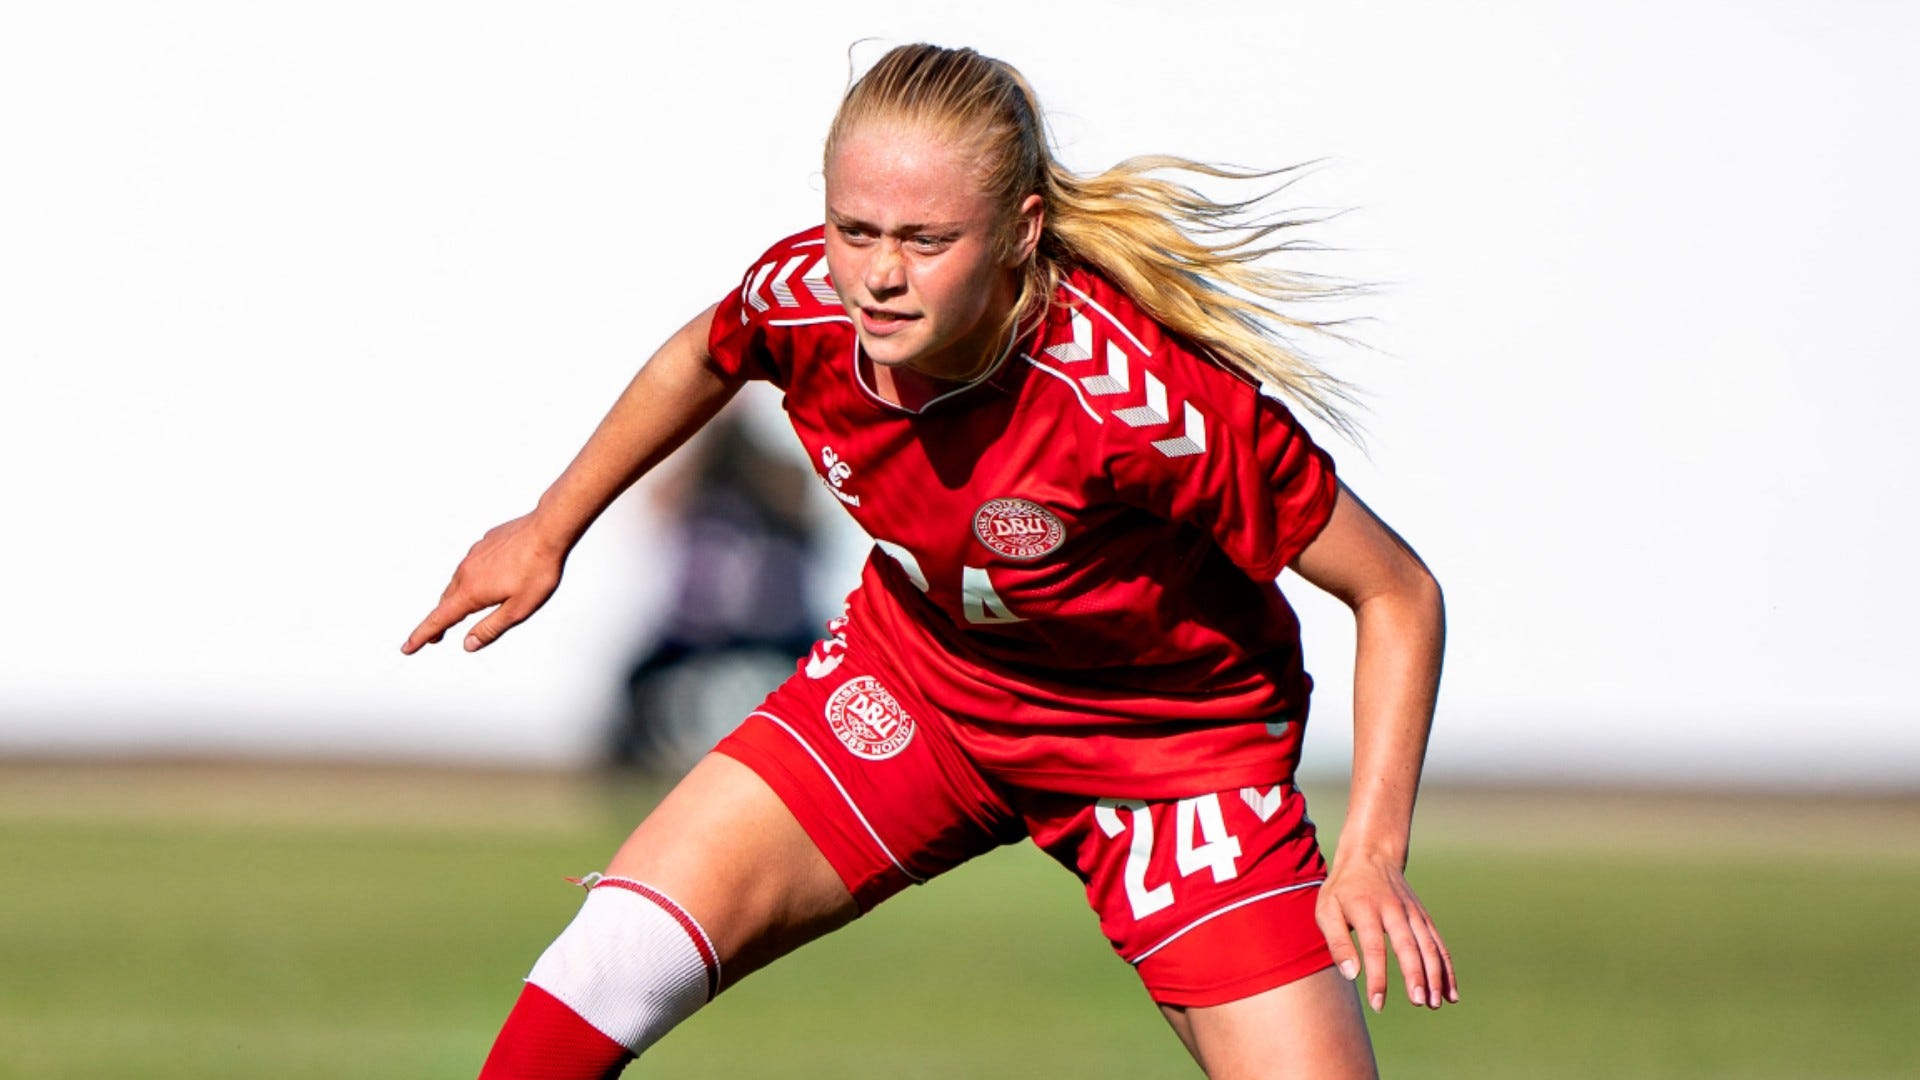 I want to be a more dangerous player ' – Denmark's NXGN star Kuhl making all her 'dreams' come true | Goal.com